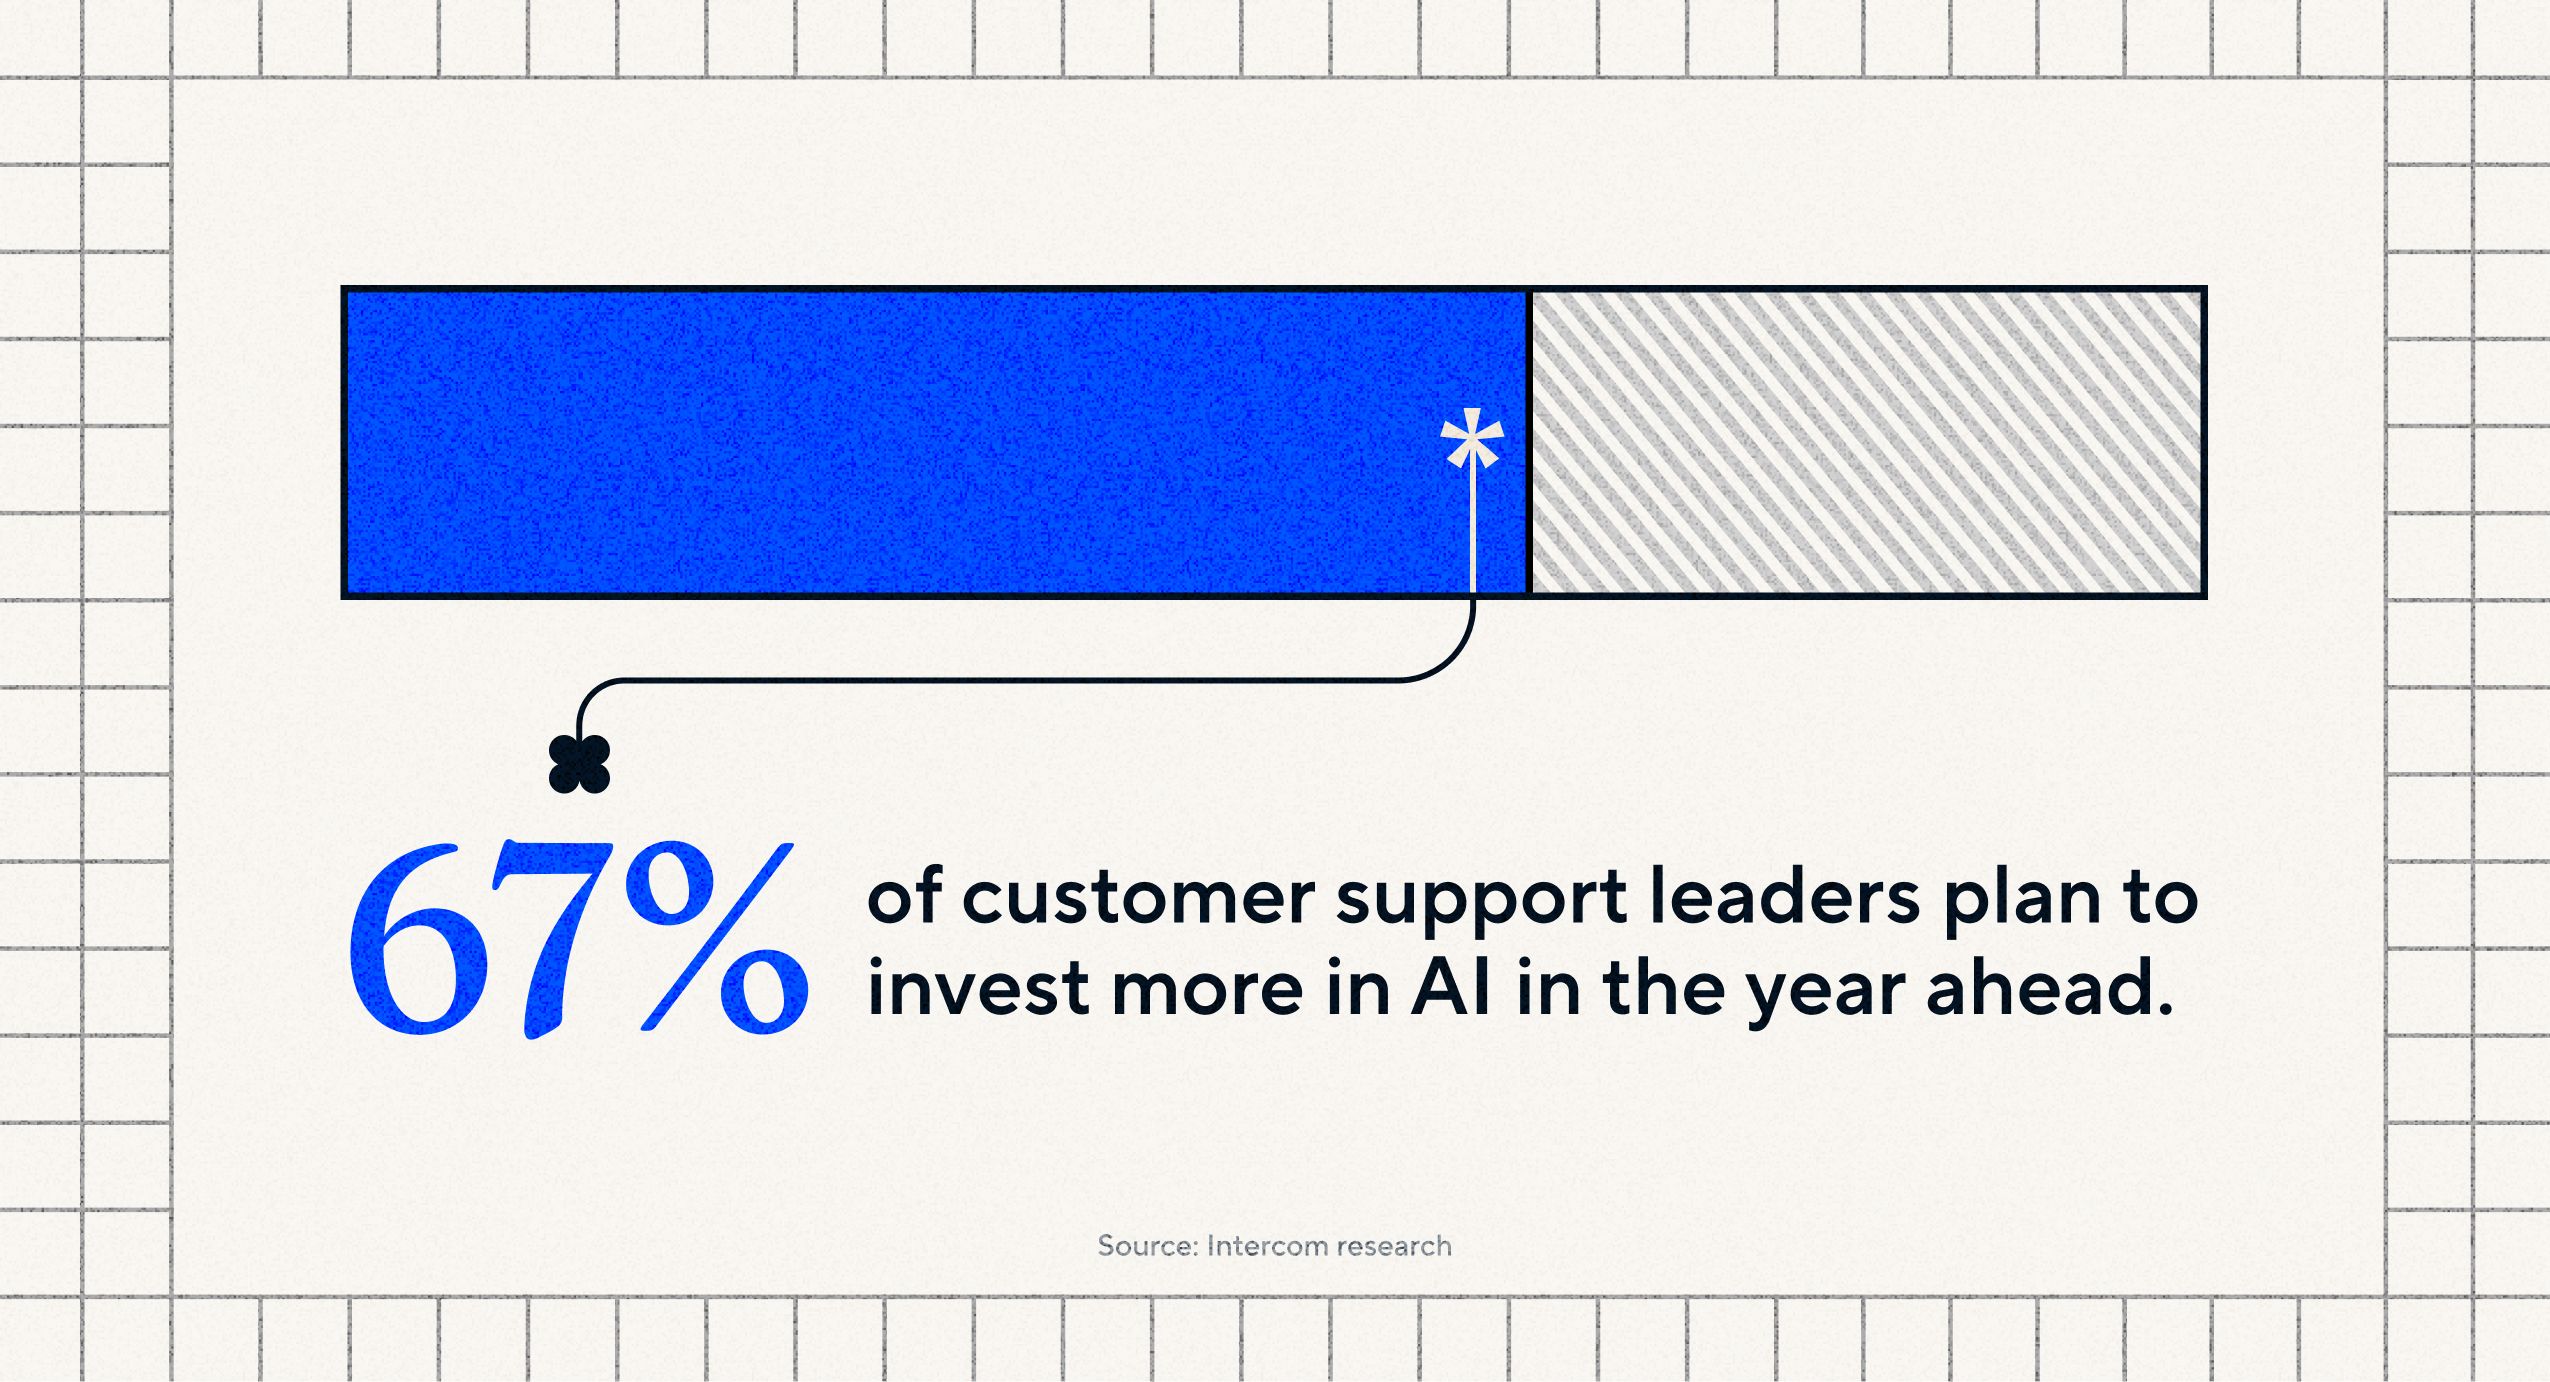 67% of customer support leaders plan to invest more in AI in the year ahead.